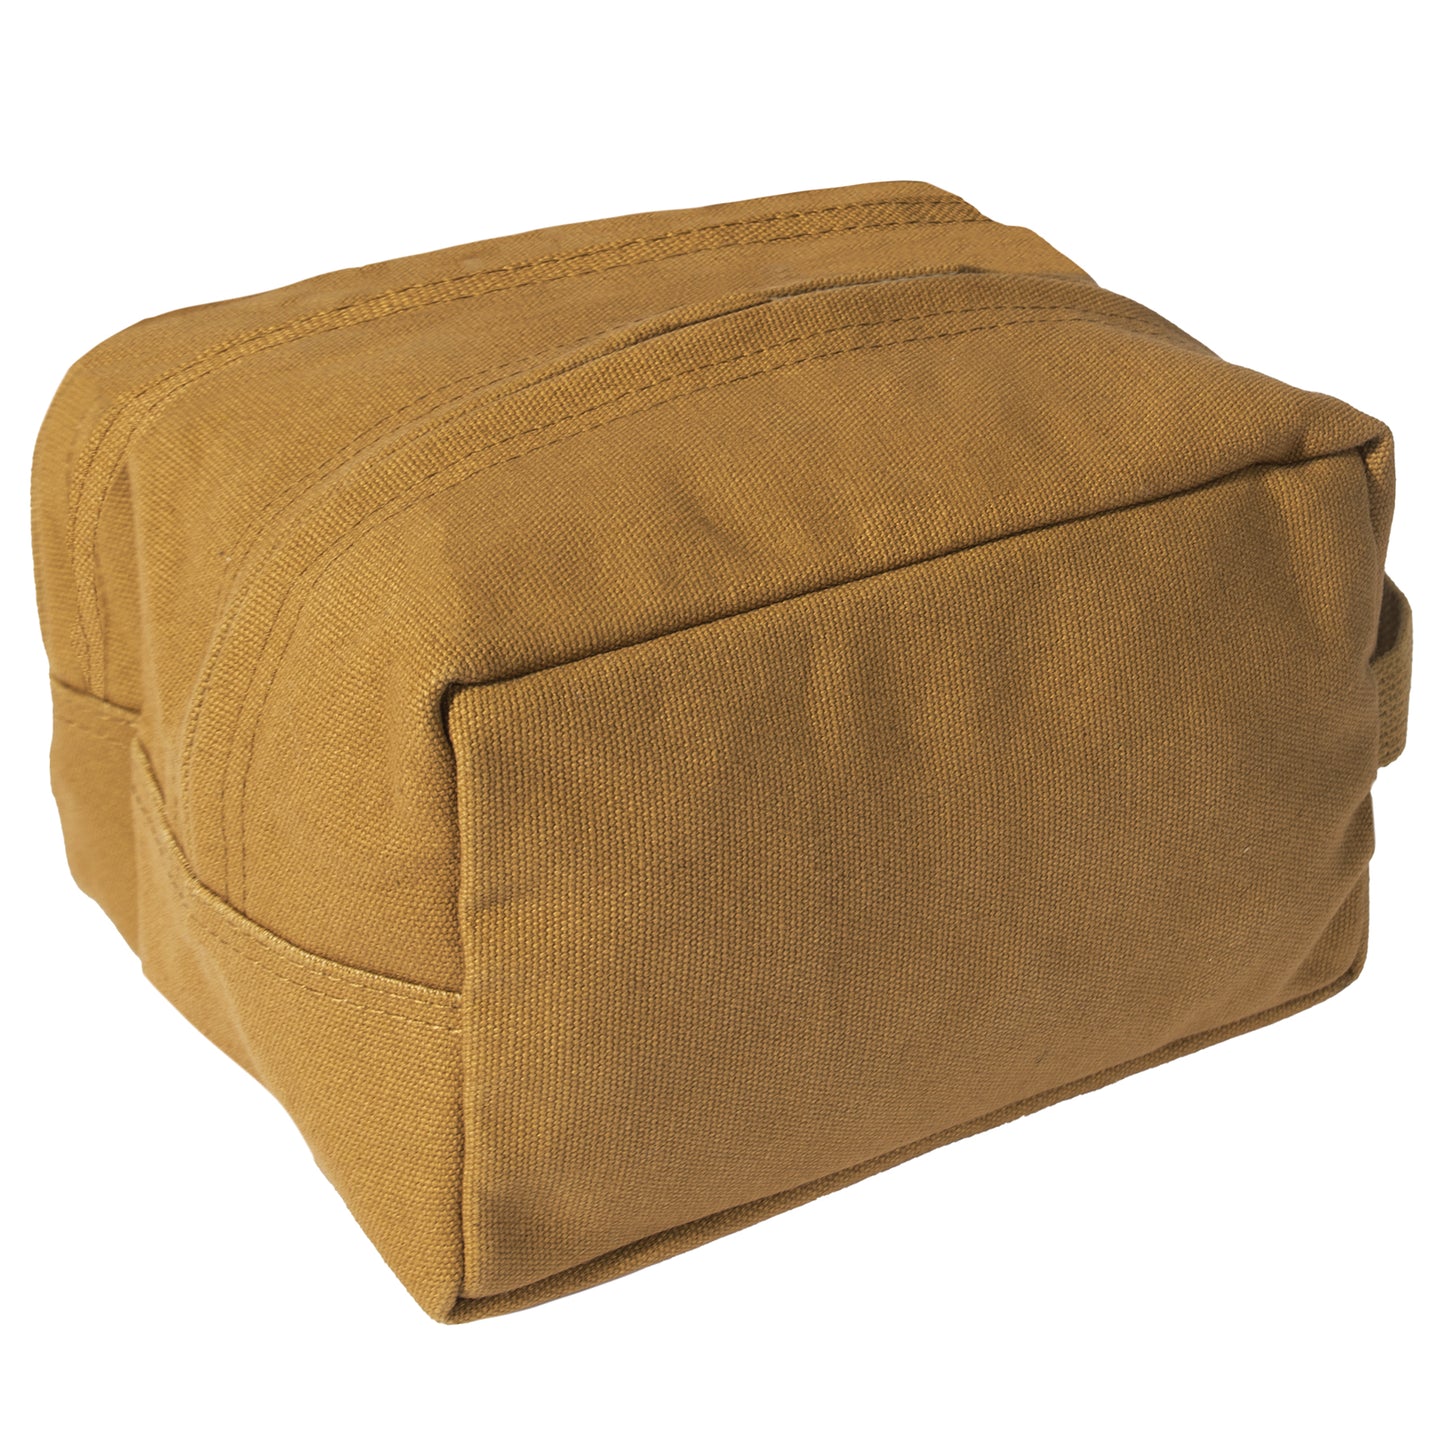 Rothco Canvas Dual Compartment Travel Toiletry Kit Bag